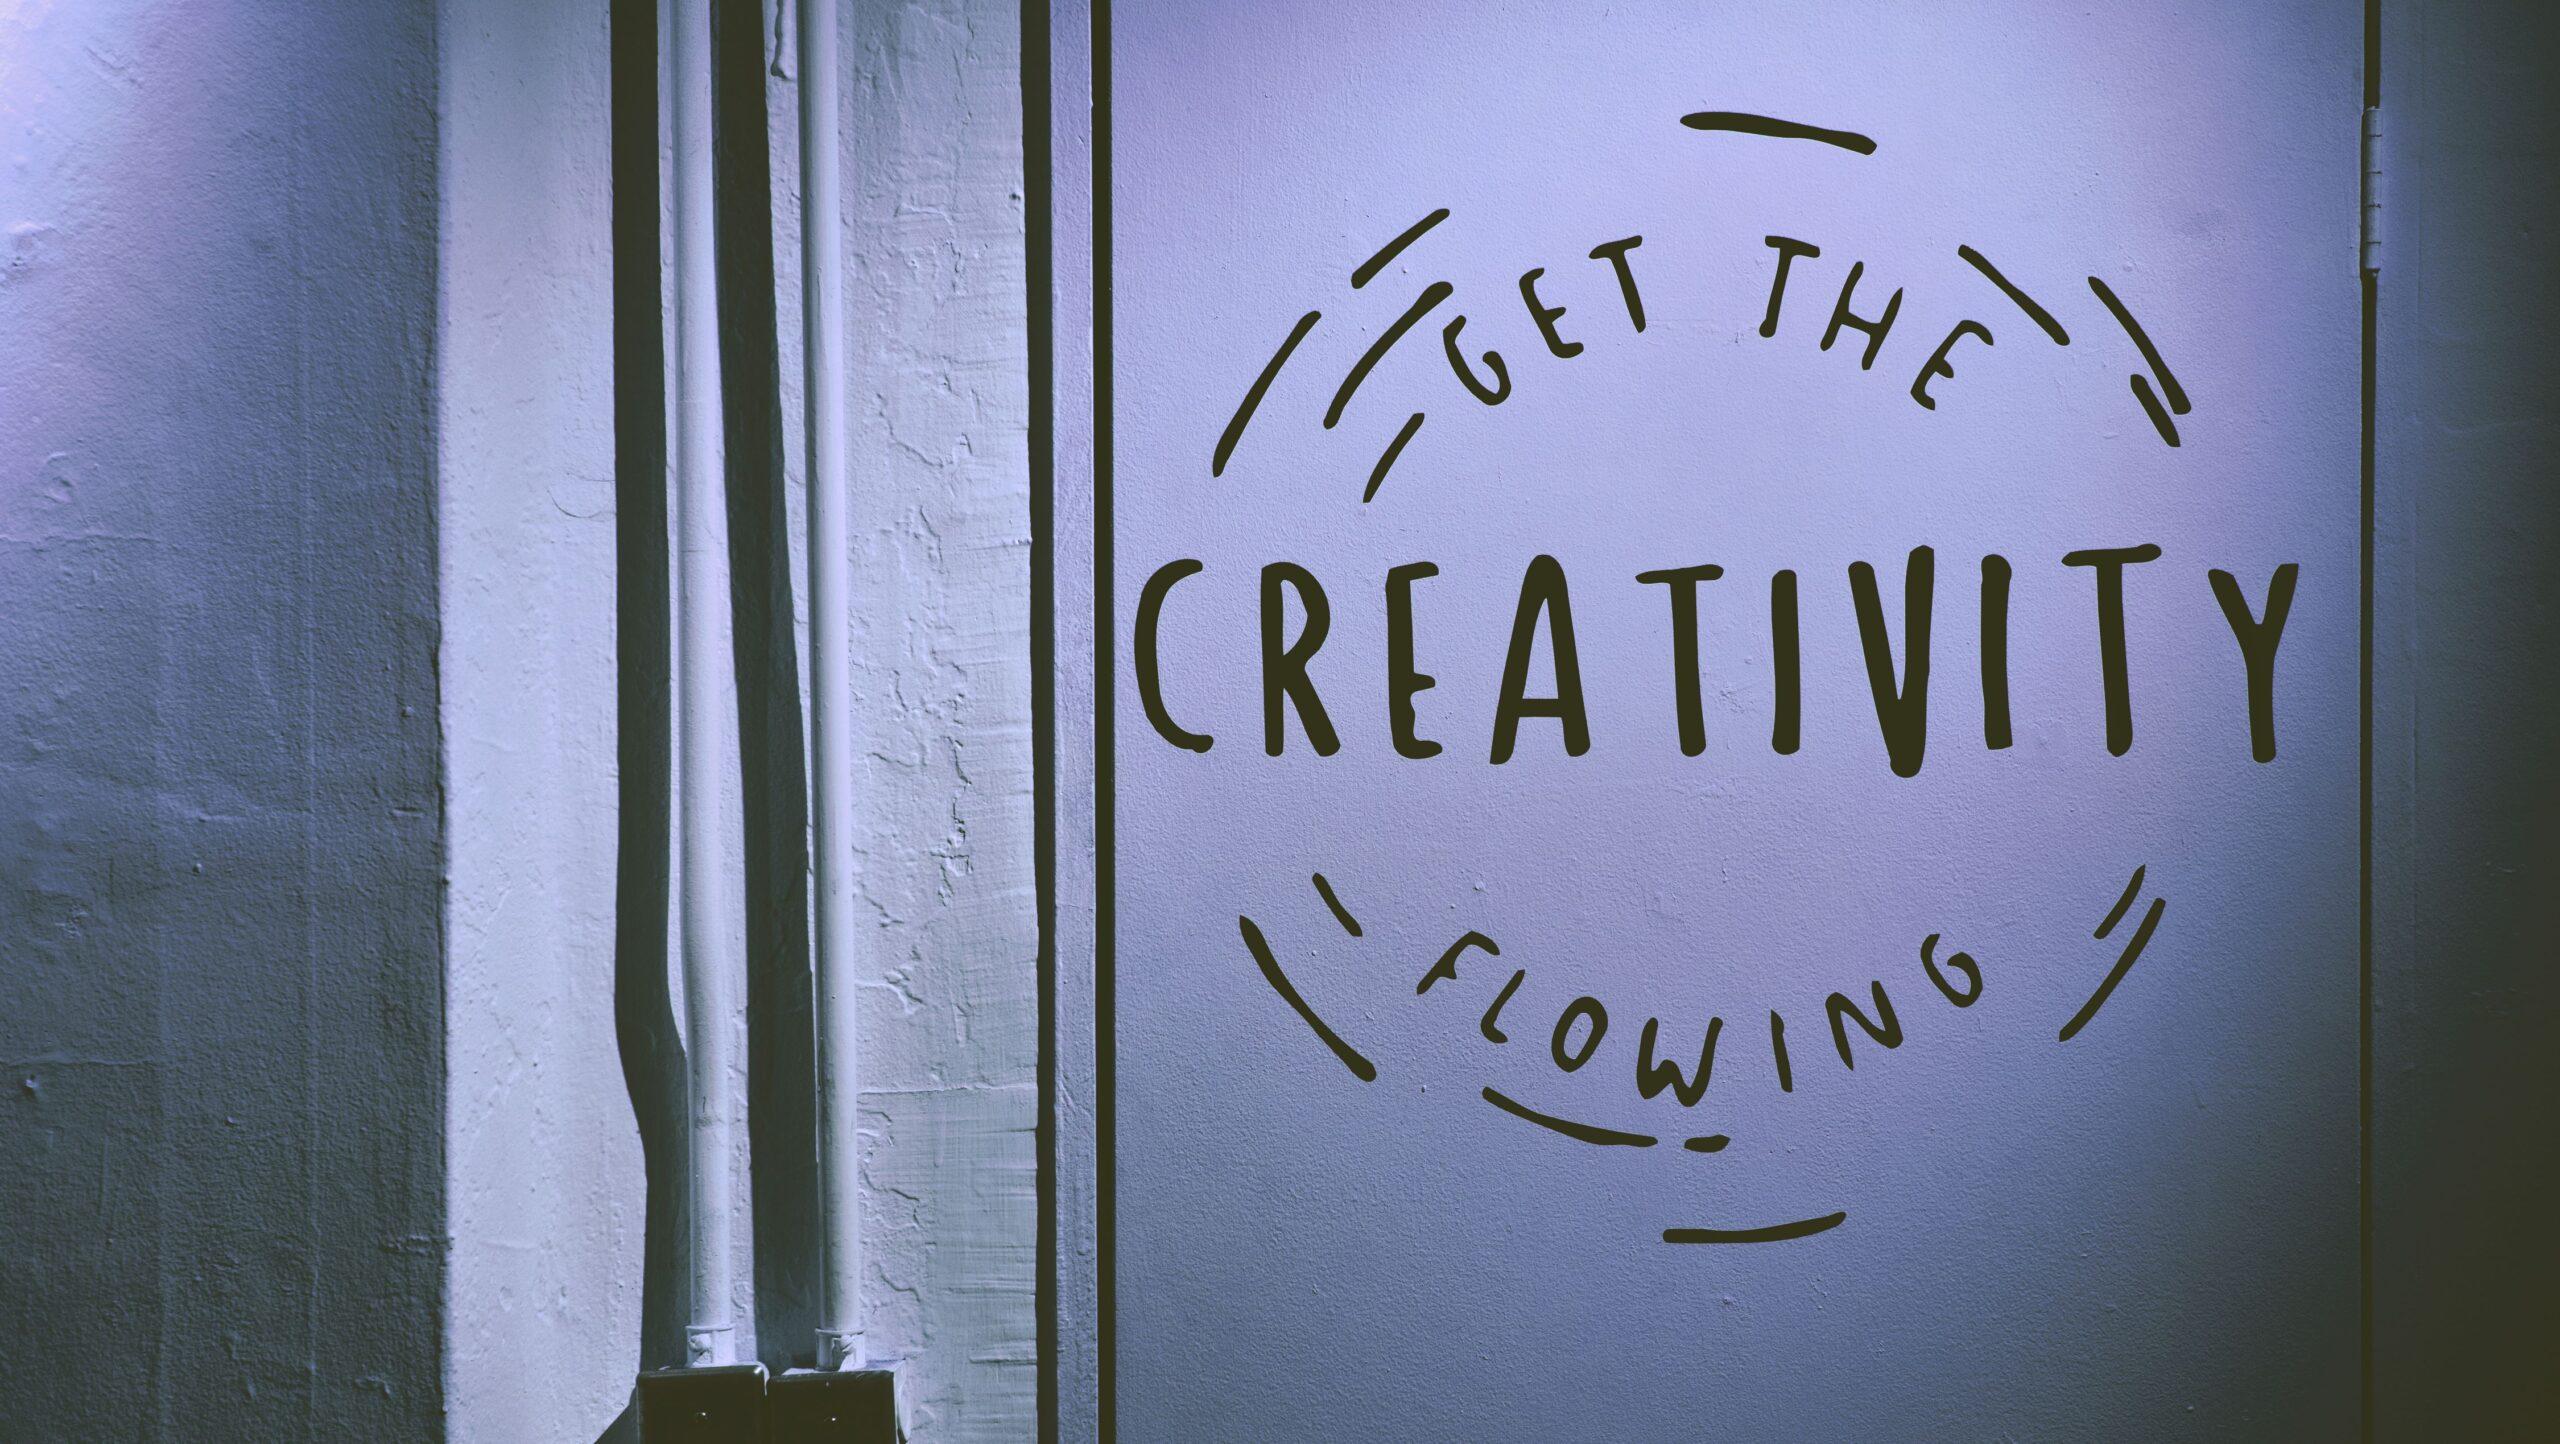 Writing painted on a wall that reads, 'Get the creativity flowing'.